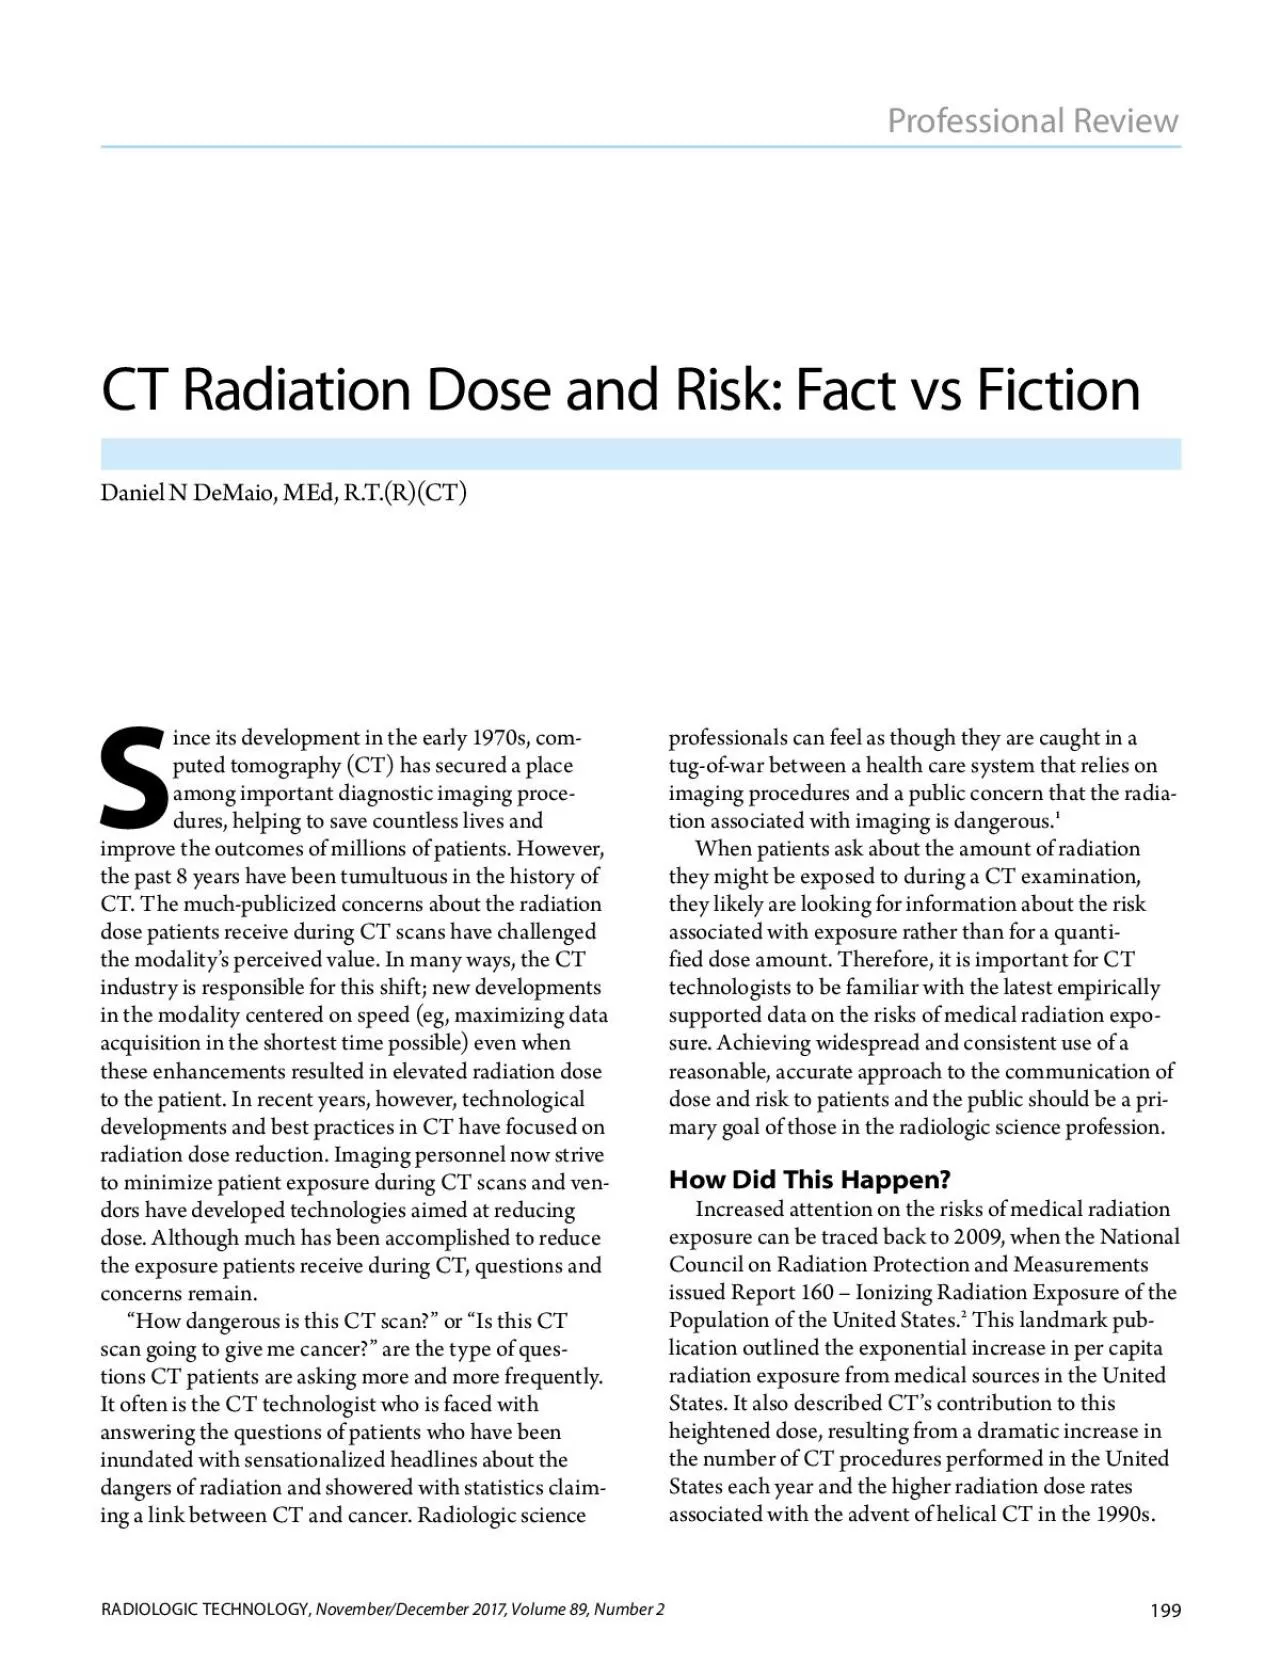 CT Radiation Dose and Risk Fact vs Fiction